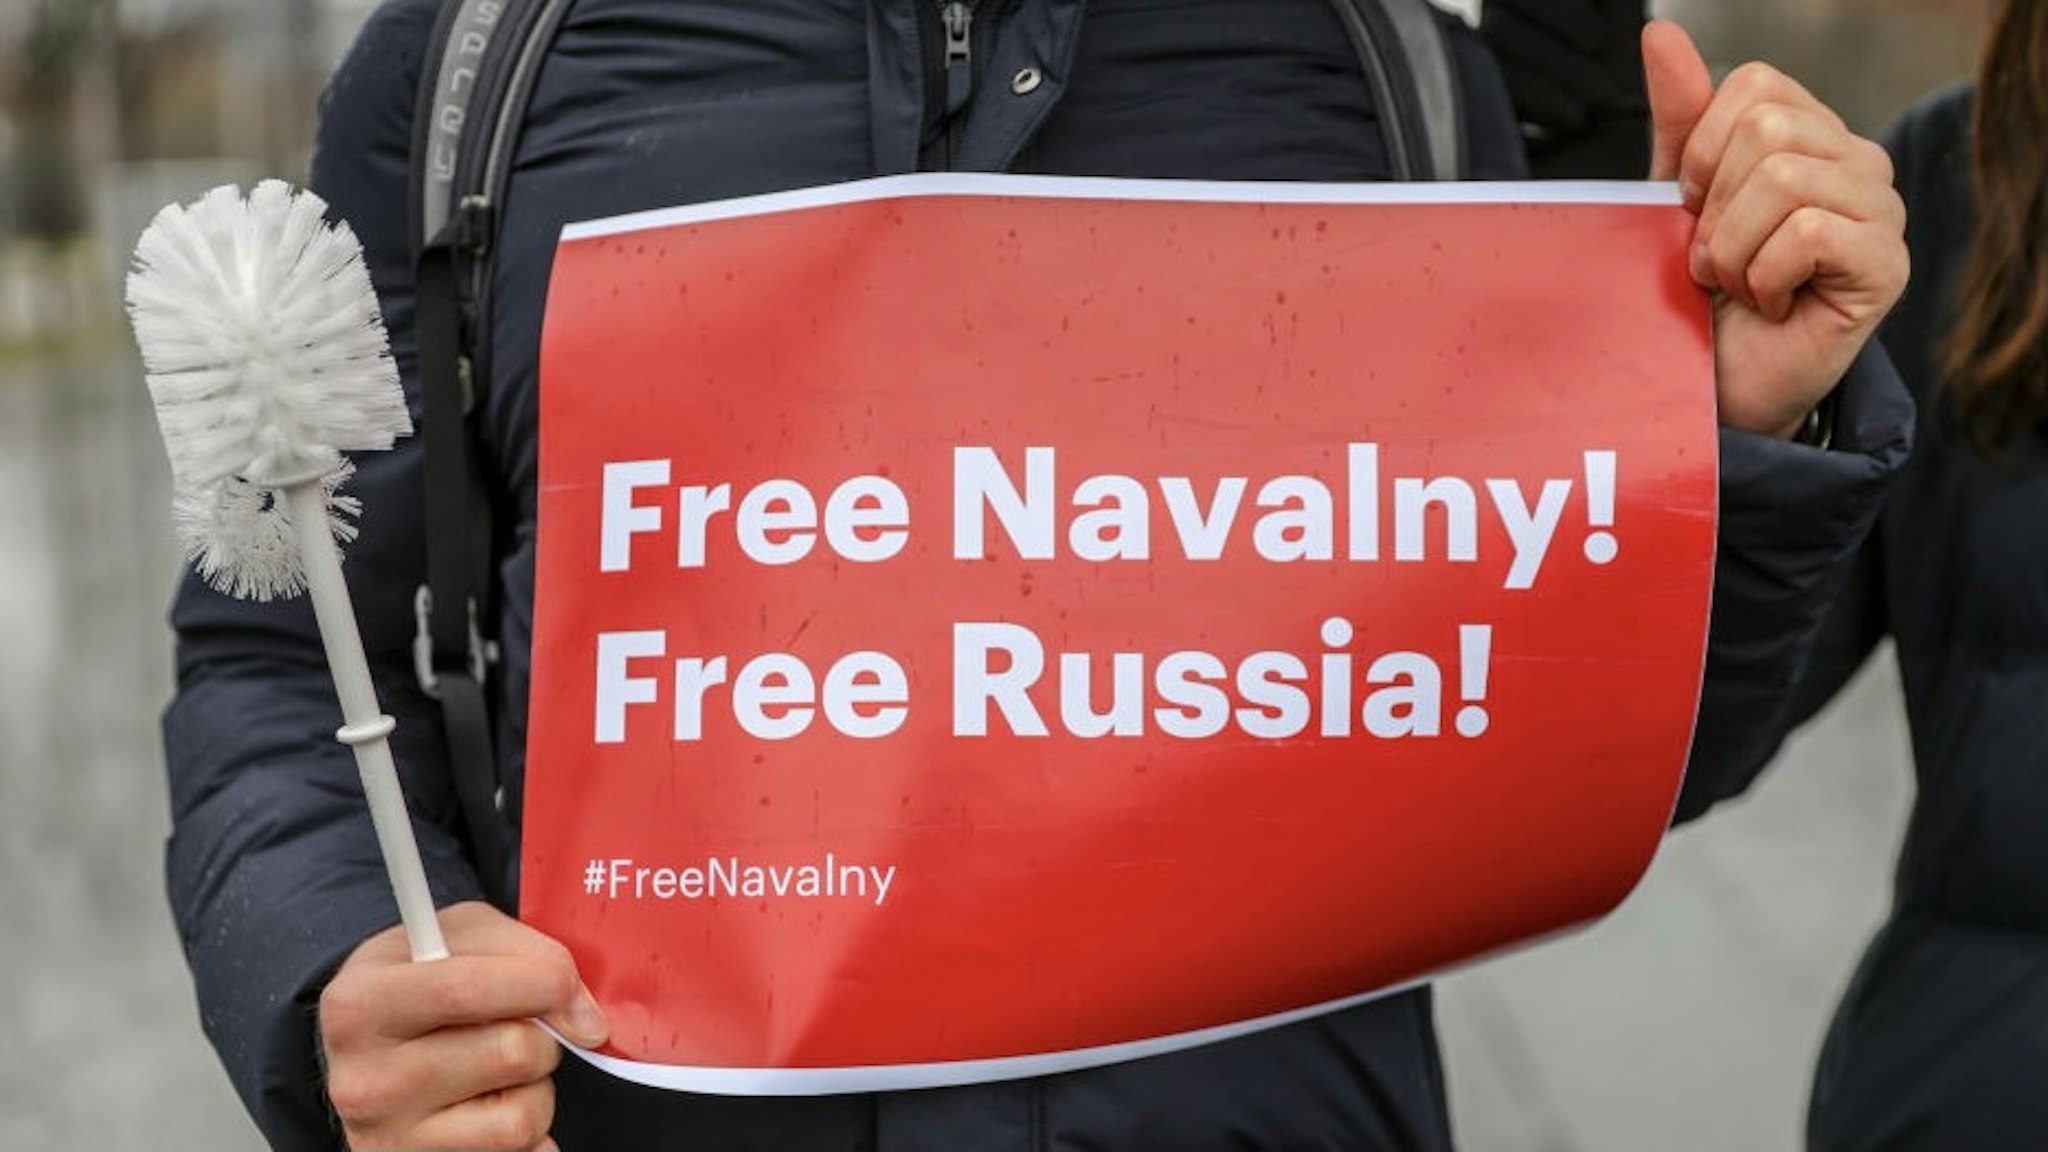 BERLIN, GERMANY - JANUARY 23: Some 2500 supporters of Russian opposition politician Alexei Navalny marched in protest demand for his release from prison in Moscow on January 23, 2021 in Berlin, Germany. The protesters marched from the federal chancellery through the Russian embassy to Brandenburg Gate in part also heeding a call by Navalny to protest against Russian President Vladimir Putin. Navalny, who was arrested earlier this week upon his return to Moscow from Germany, has called for protests against Putin across Russia, though Russian authorities have refused to allow them and deemed the protests illegal. Berlin is home to a large expatriate Russian community. (Photo by Omer Messinger/Getty Images)